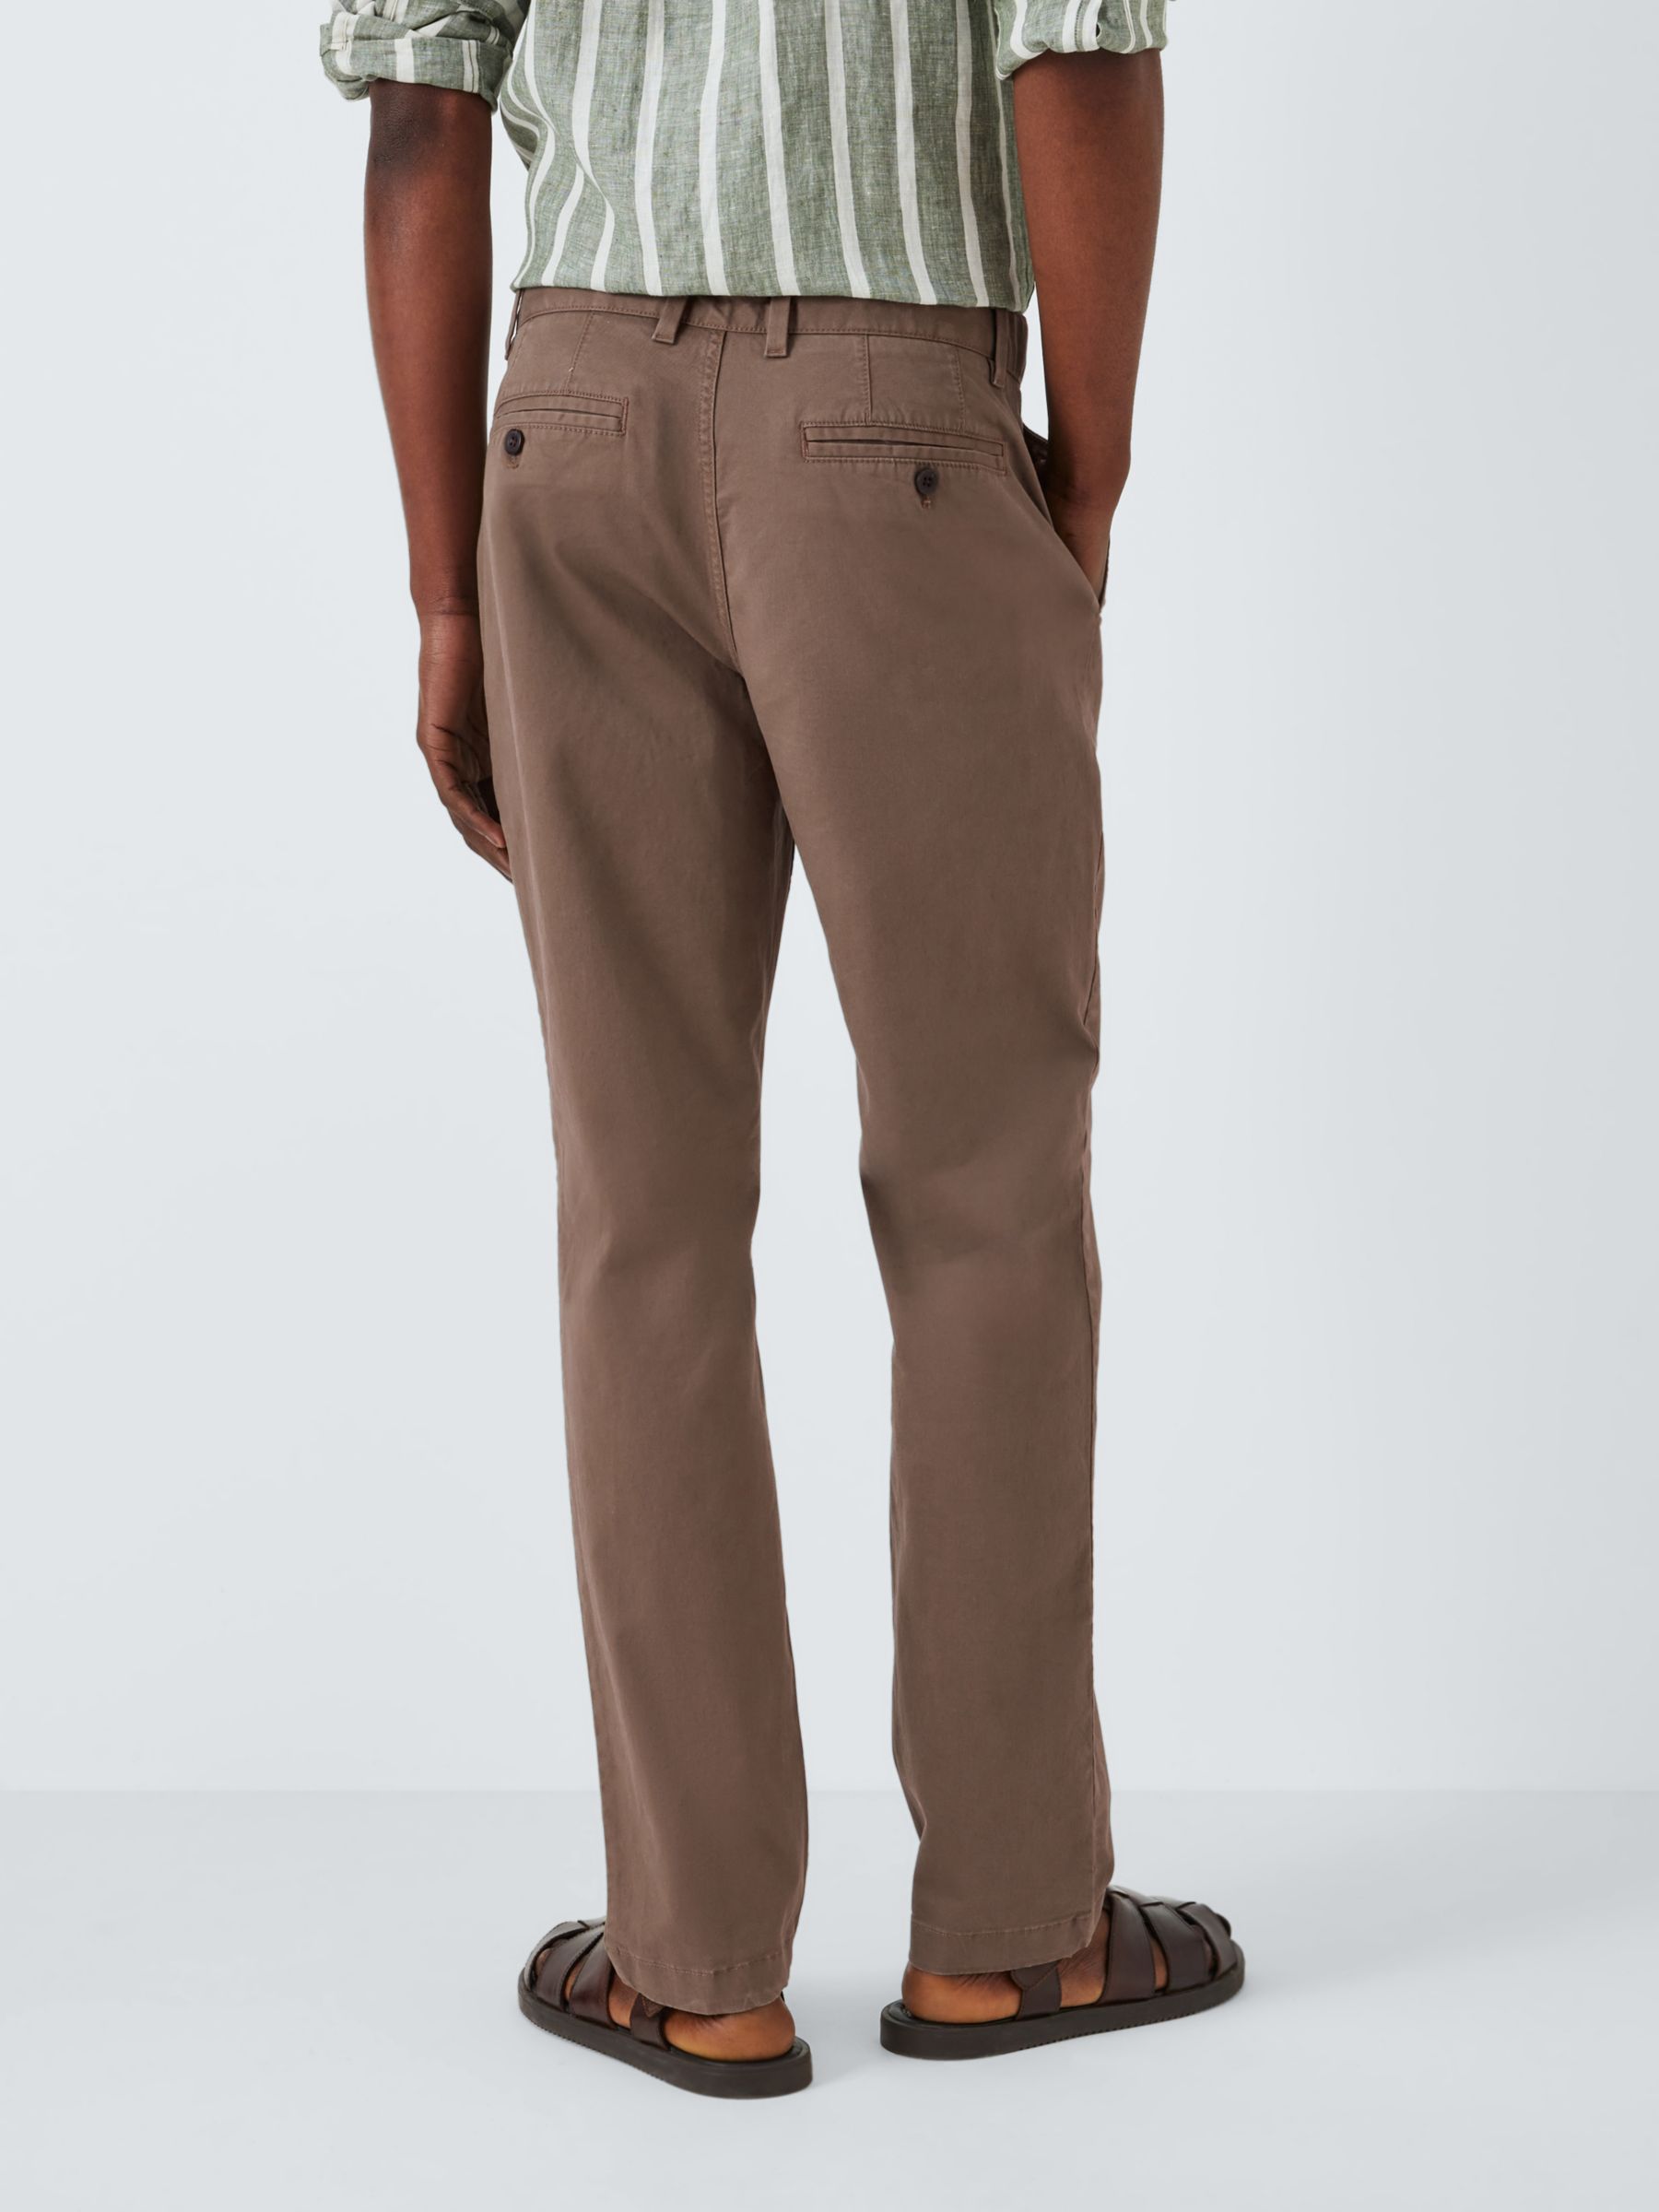 John Lewis Essential Straight Cut Chinos, Taupe, 30R